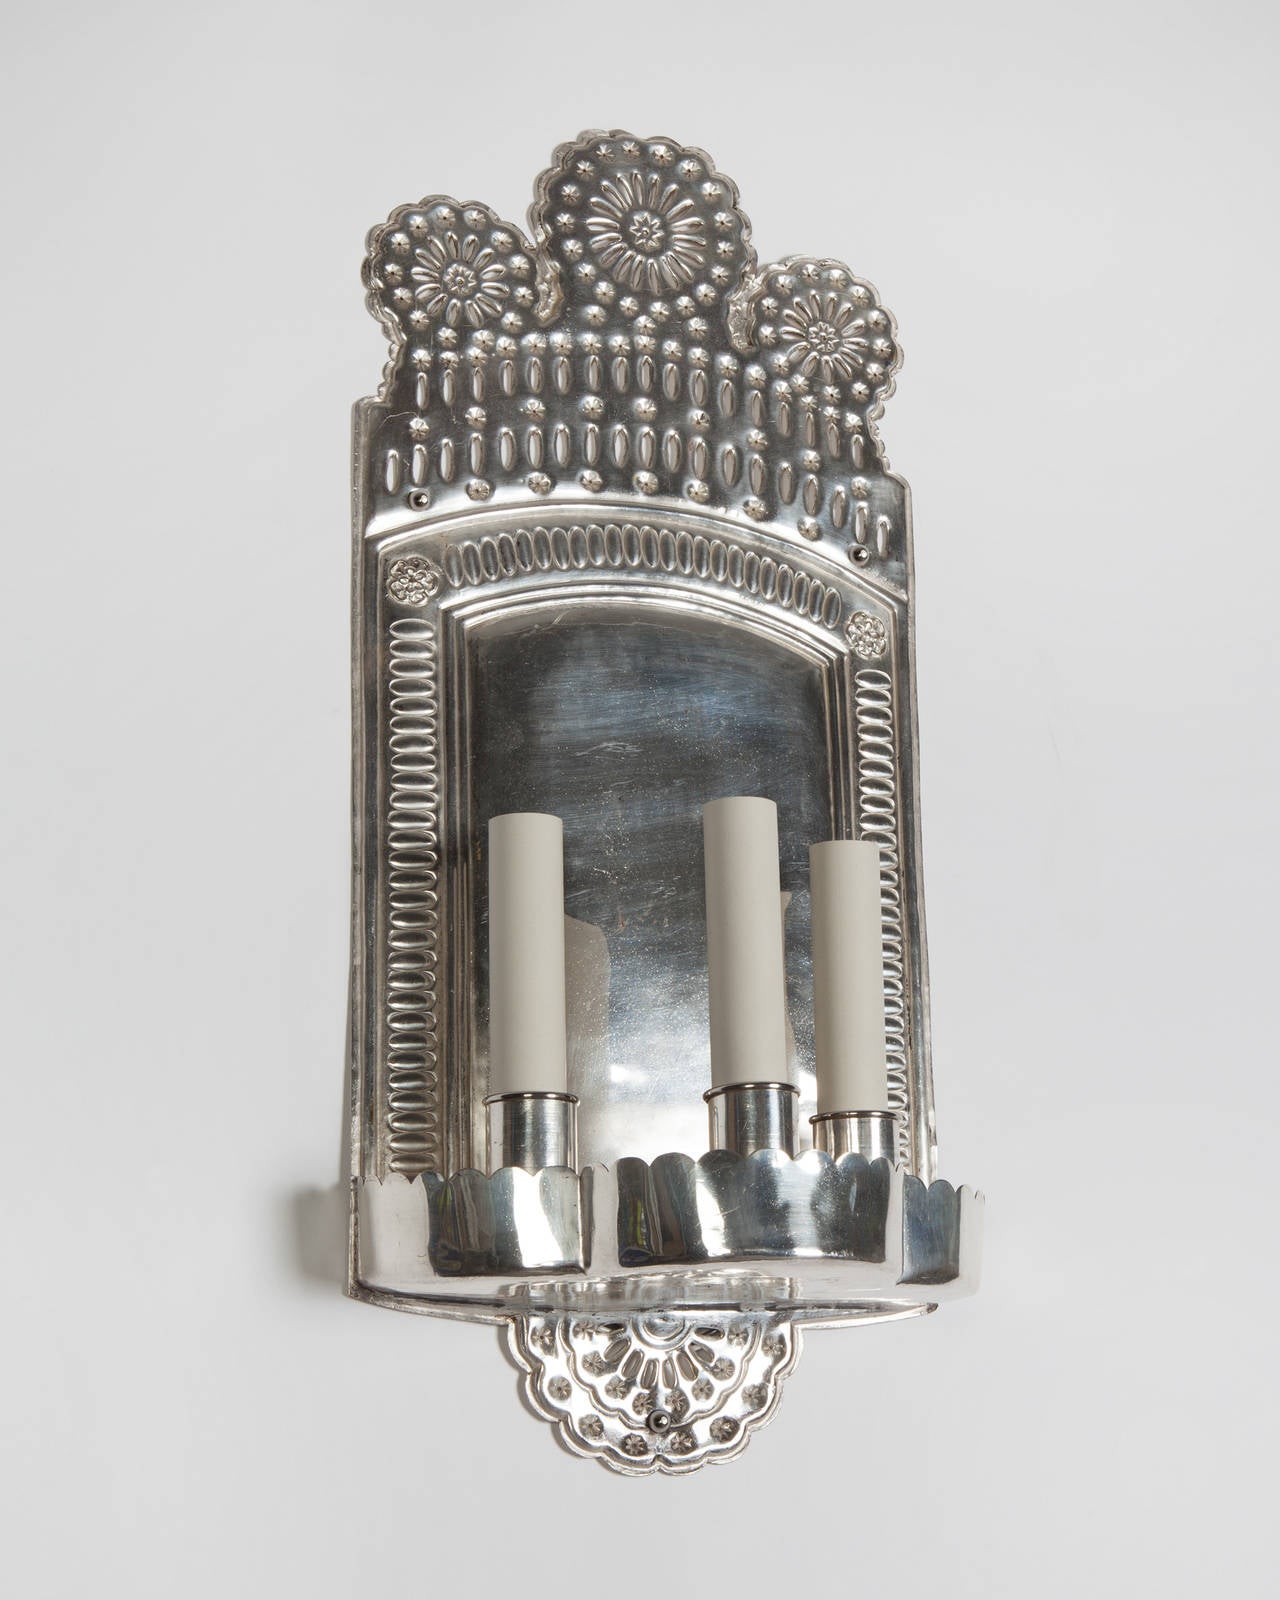 AIS2909

Circa 1900
A pair of antique, repousse silverplate sconces, having three uprights in a lobed tray set in front of a bellied rectangular backplate, surmounted by pinwheel floral details.

Dimensions:
Overall: 21-1/2